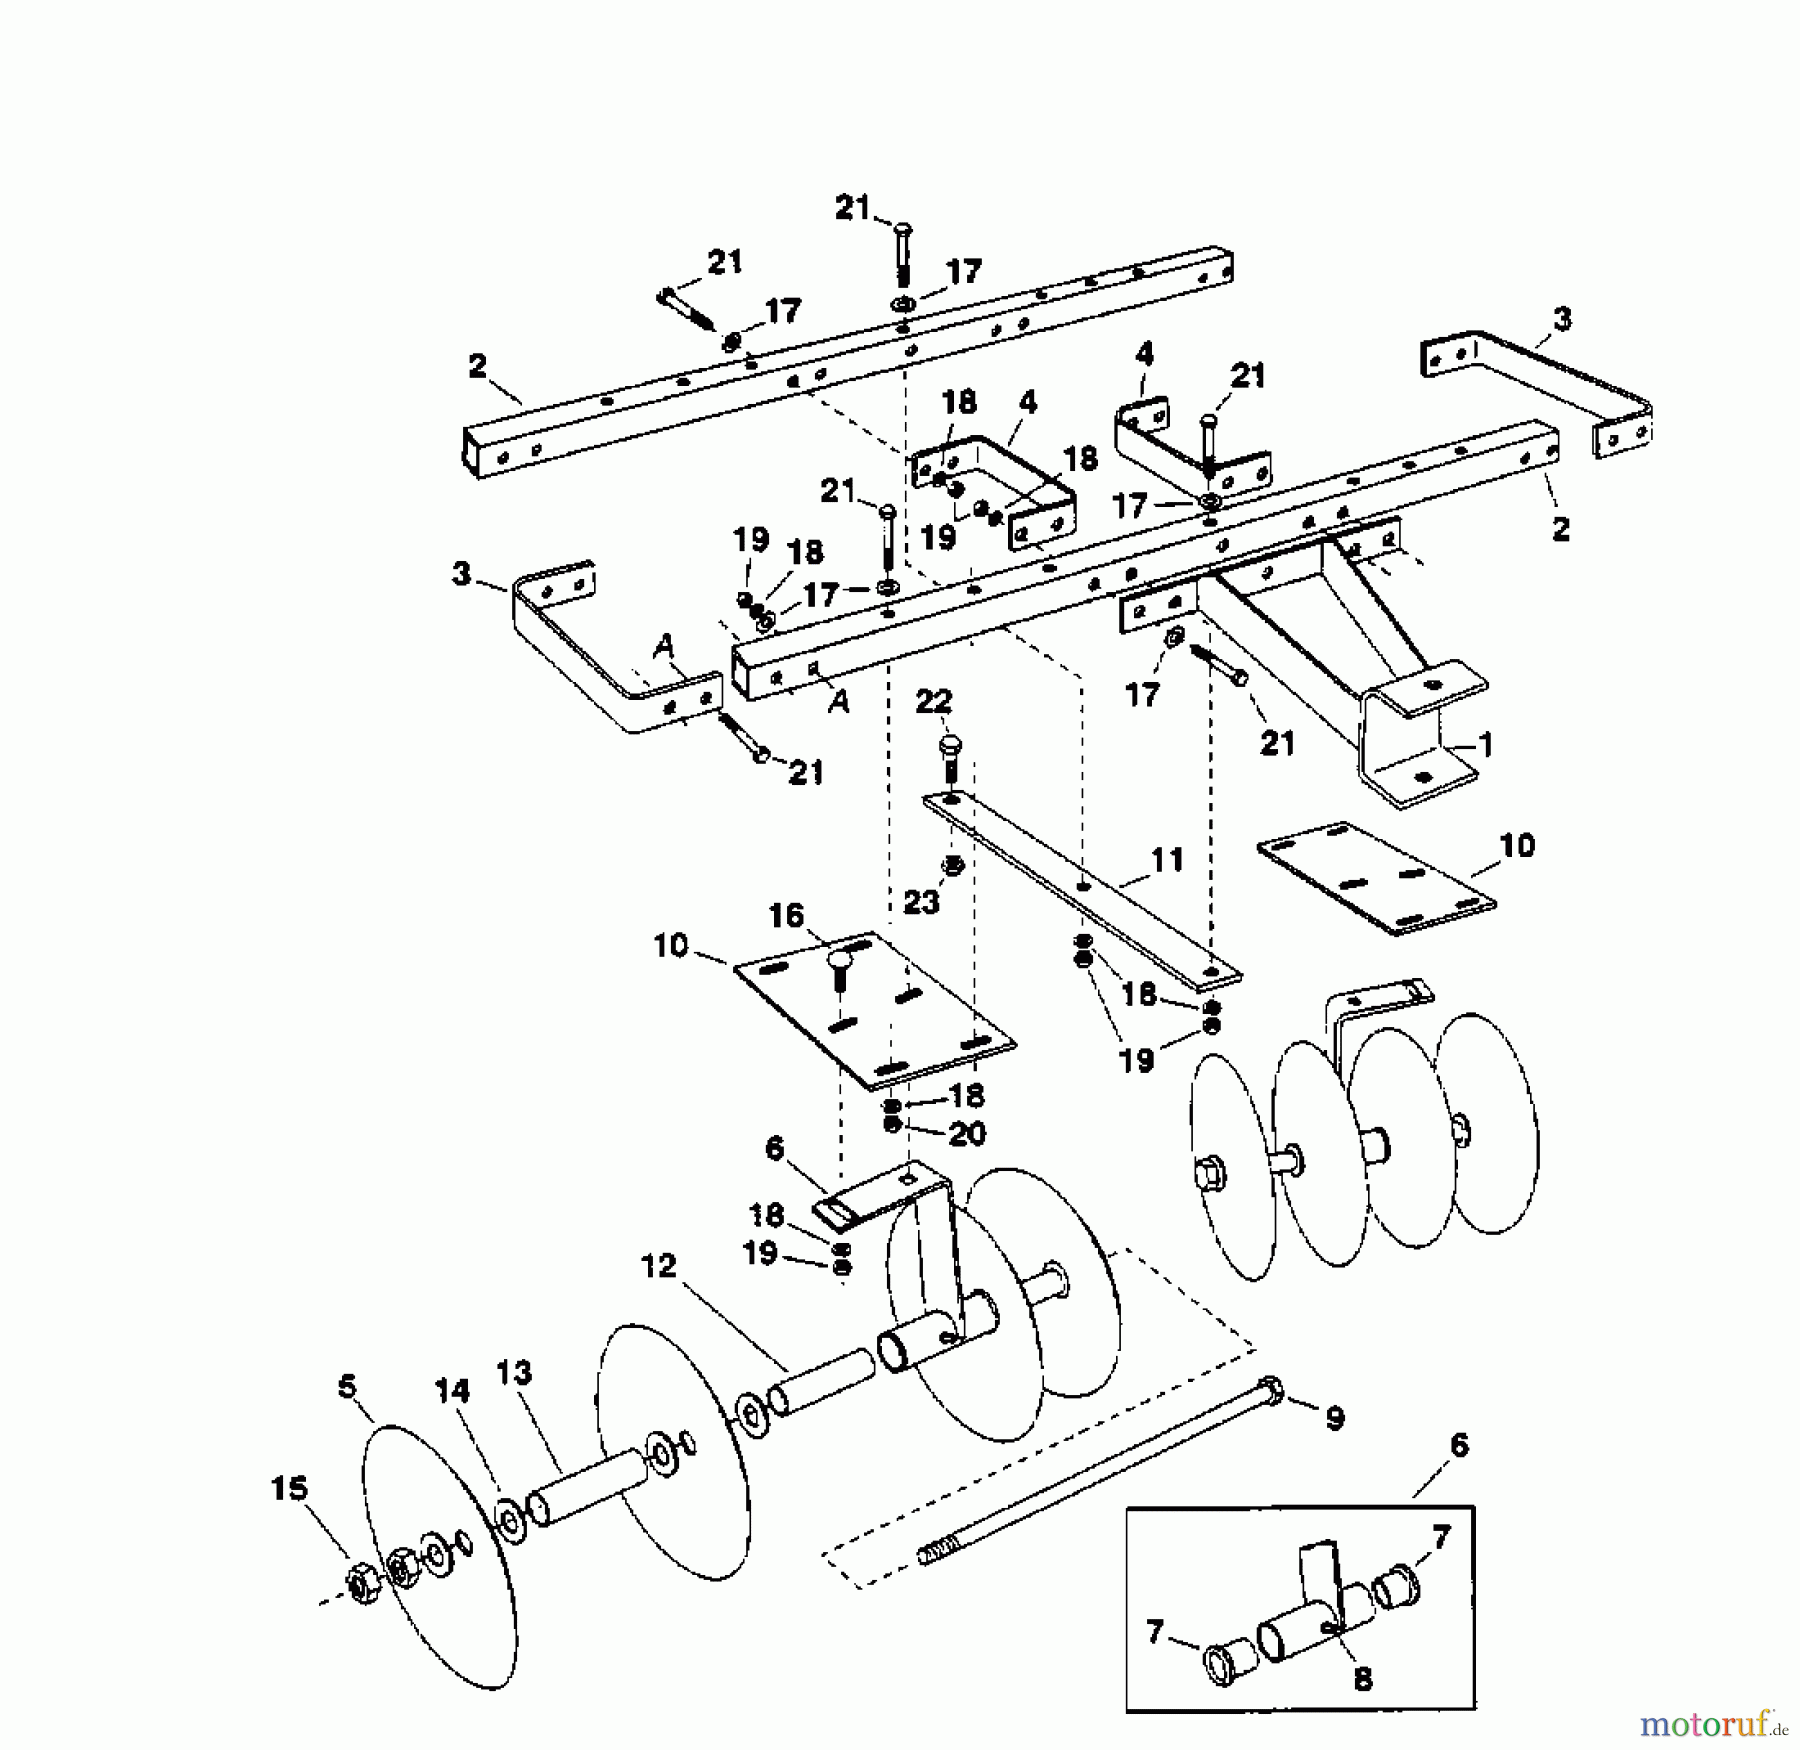  MTD Accessories Accessories garden and lawn tractors Cultivator 45-0266  (OEM-190-980) OEM-190-980  (2000) Basic machine